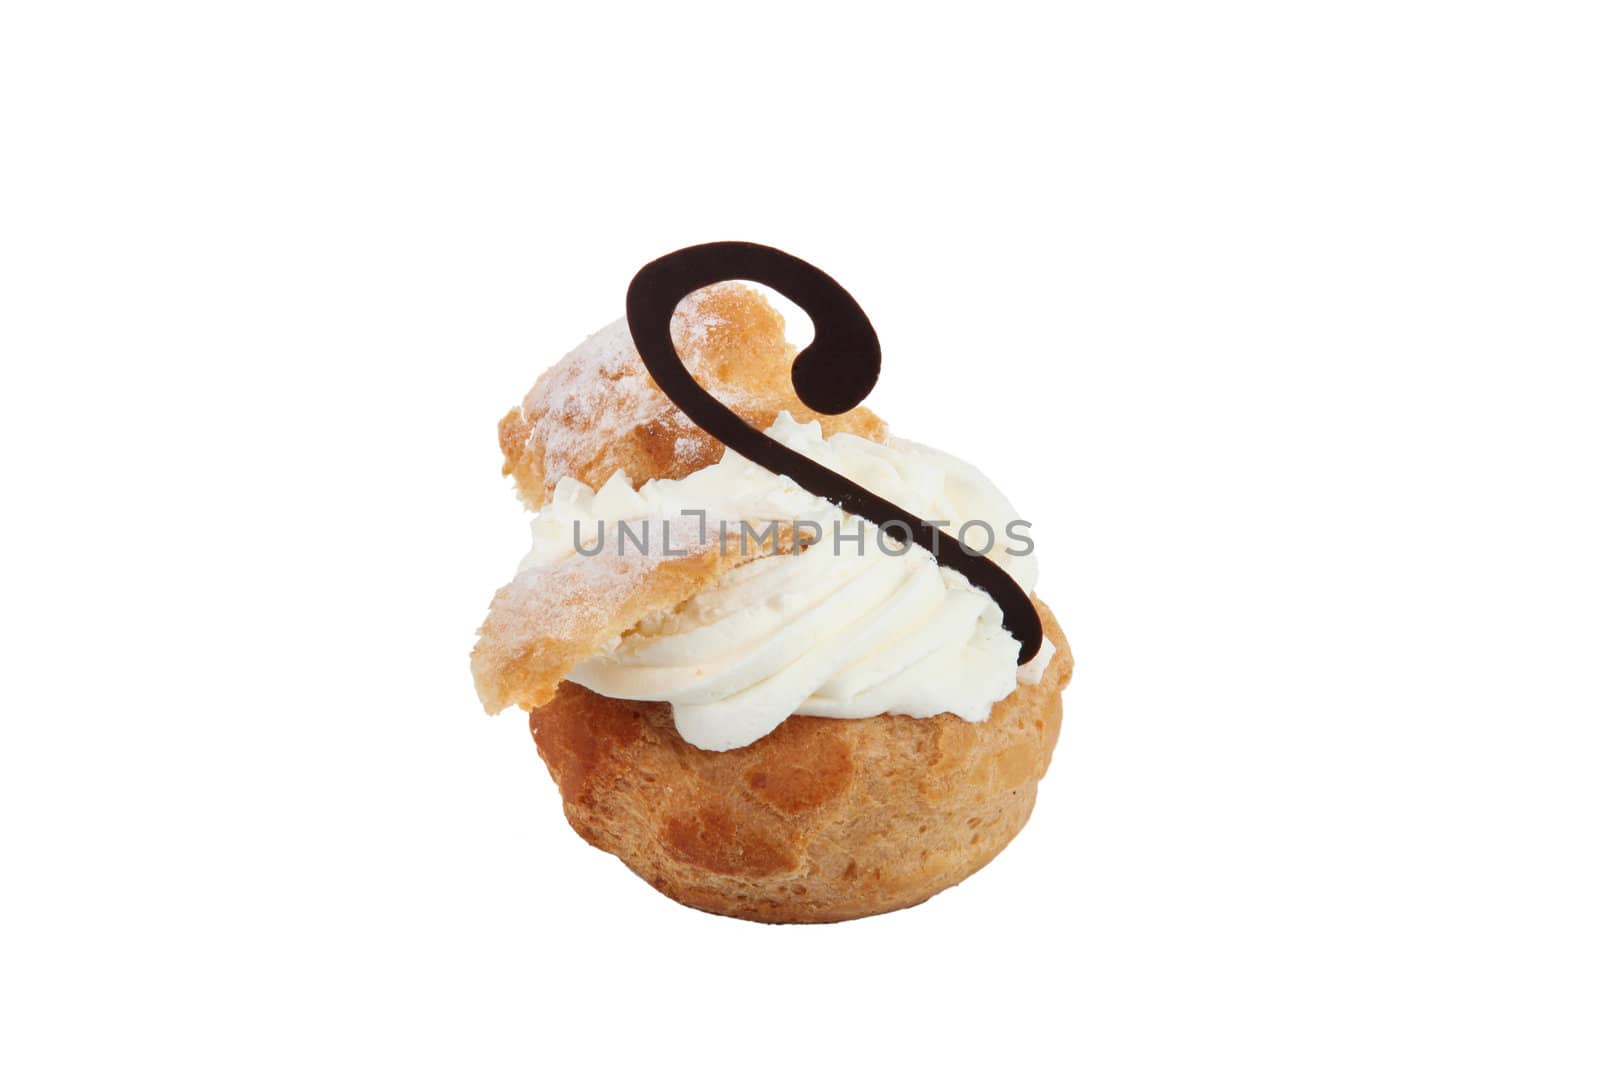 Cream filled pastry